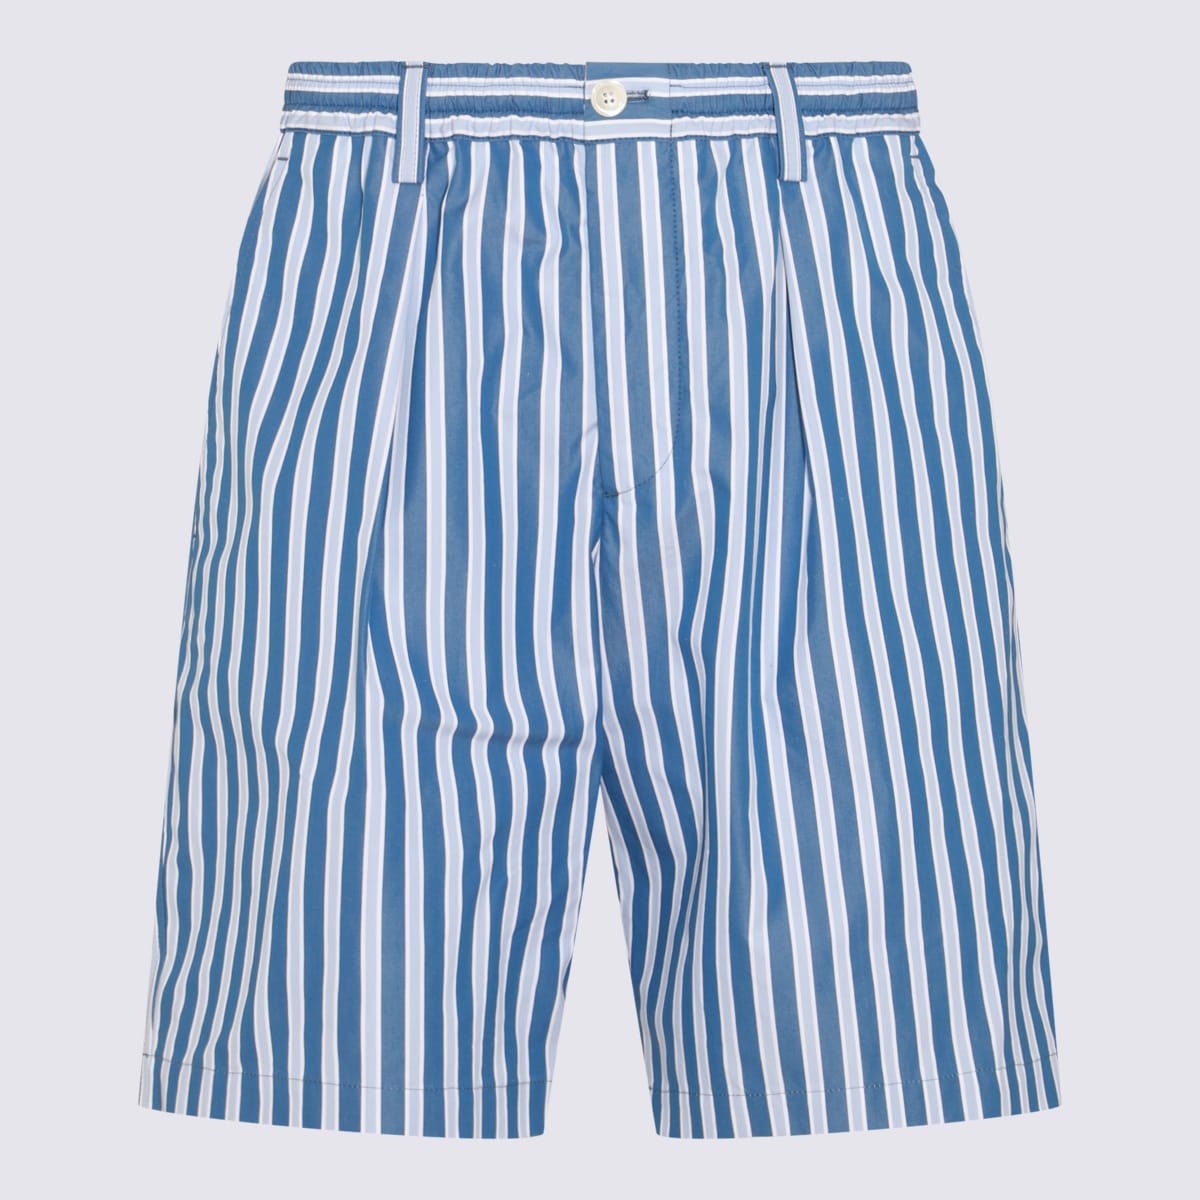 White And Light Blue Cotton Shorts